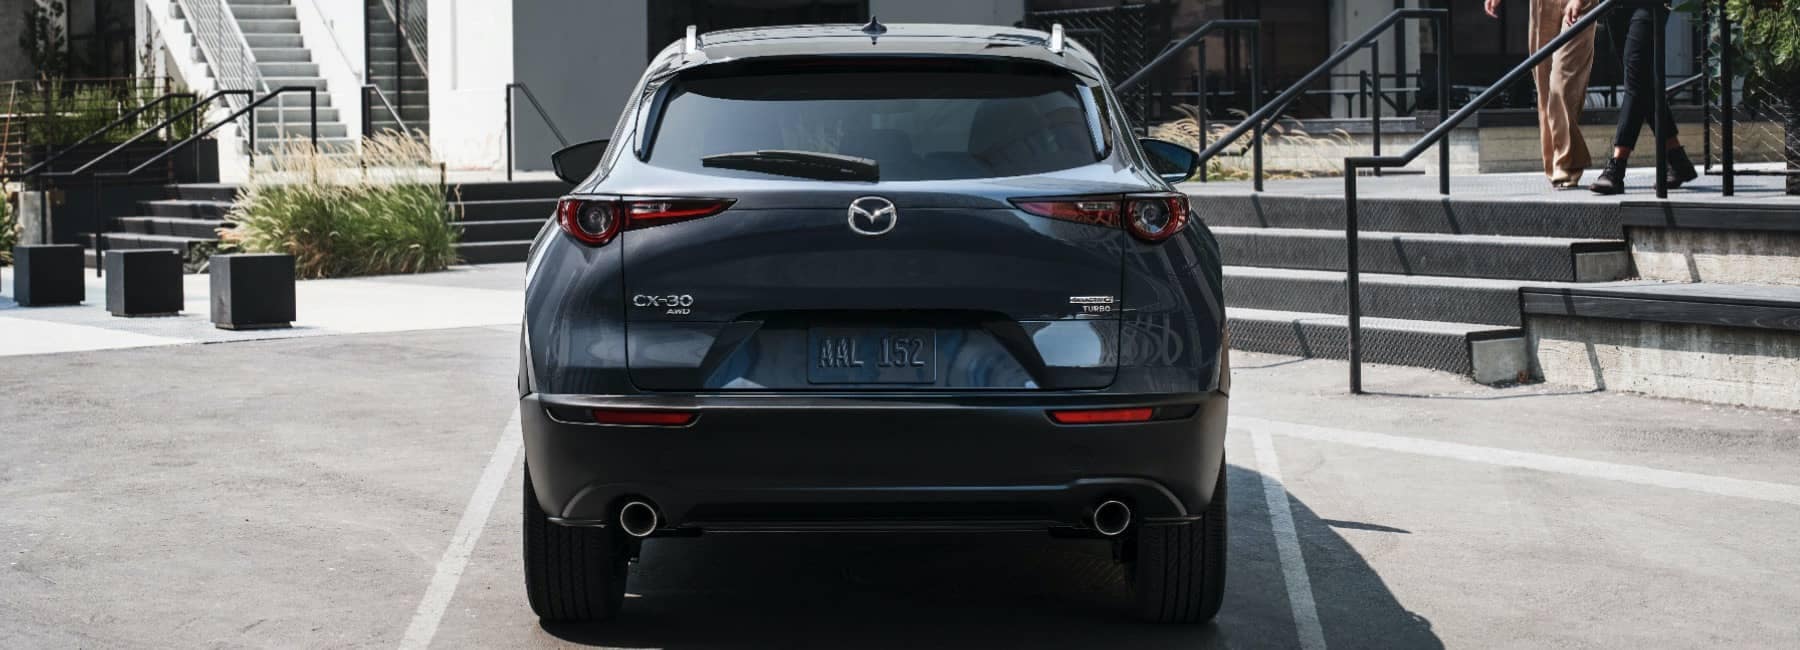 2021 Mazda CX-30 compact crossover parked